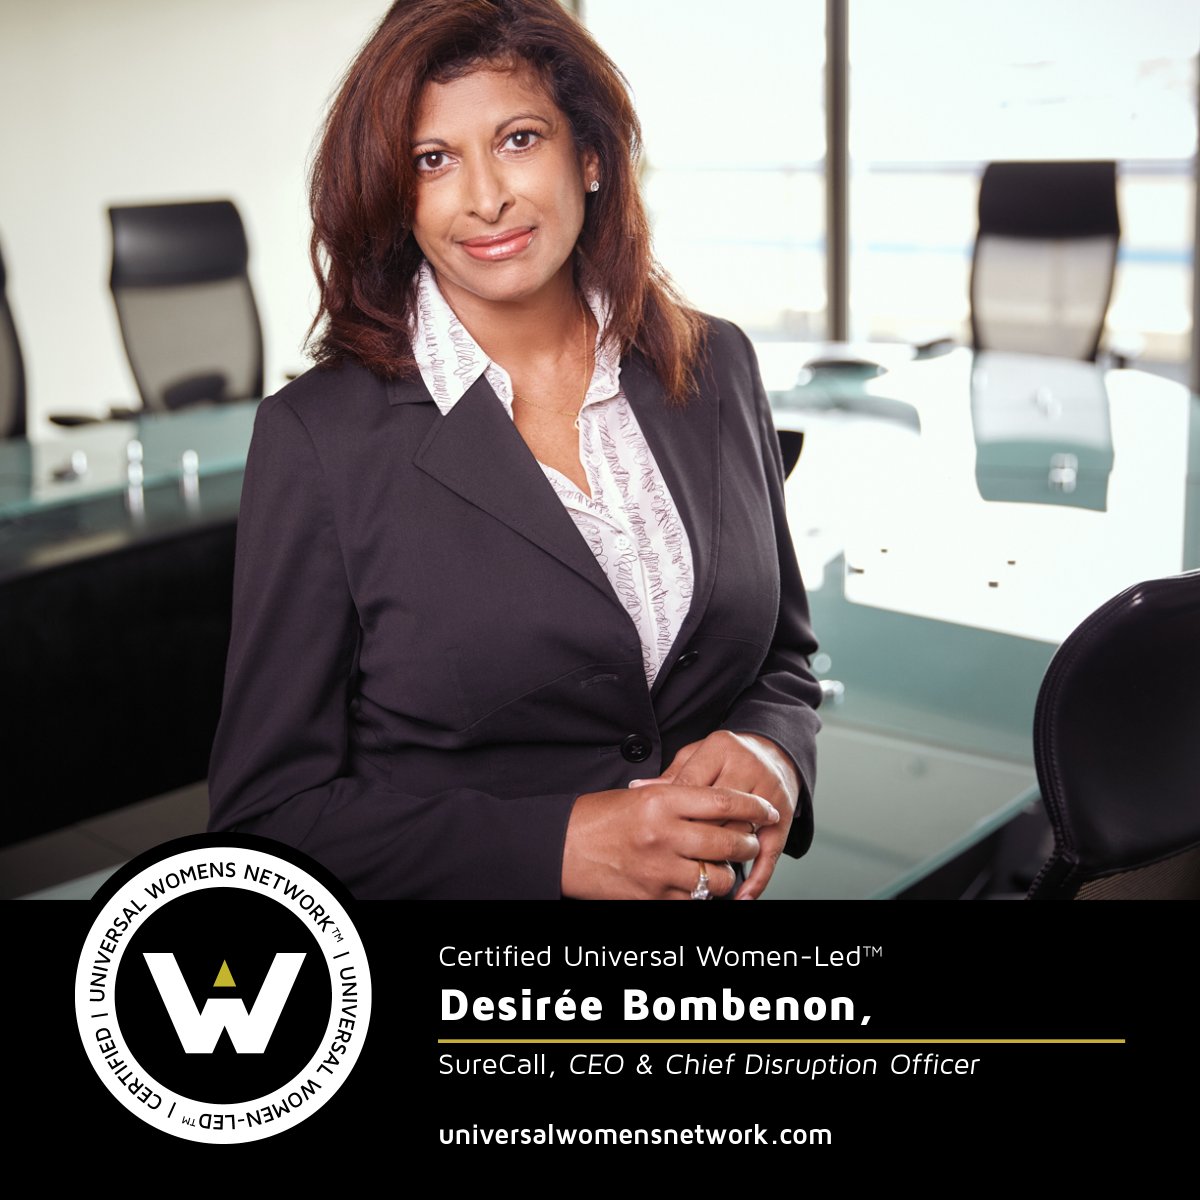 ANNOUNCEMENT? 

⭐️Universal Women-Led™ Certified⭐️ Congrats, Desiree Bombenon, CEO, SureCall.  ➡️  bit.ly/3SJ3iXb

Everyone plays a role to SupportHER. Buy from women, invest in them and champion them! 

Get Certified ➡️ bit.ly/3xwEfgm

#Womenowned #Womenled